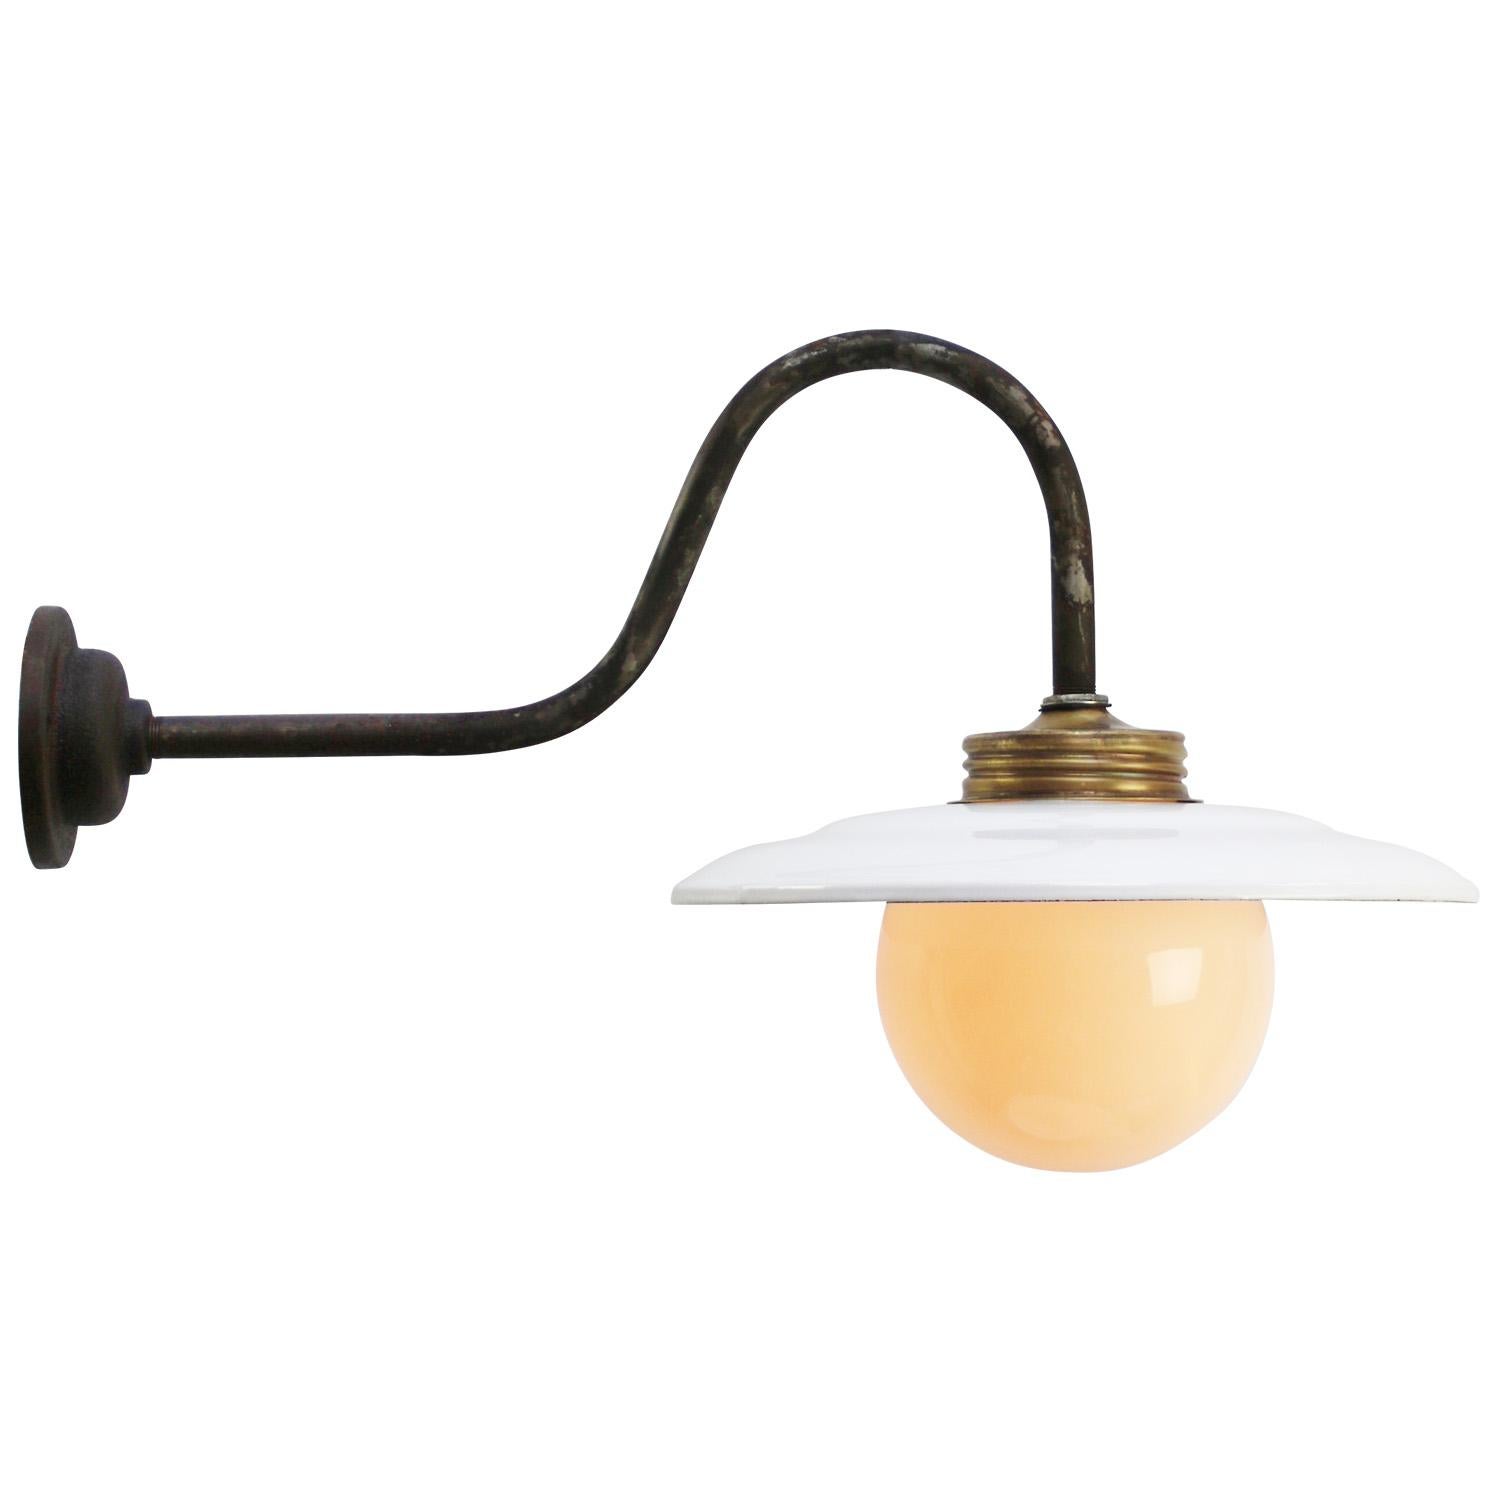 White enamel industrial wall light with white interior.
cast iron, opaline glass globe.

diameter cast iron wall mount: 10.5 cm / 4” cm, 2 holes to secure.

Weight: 1.80 kg / 4 lb

Priced per individual item. All lamps have been made suitable by